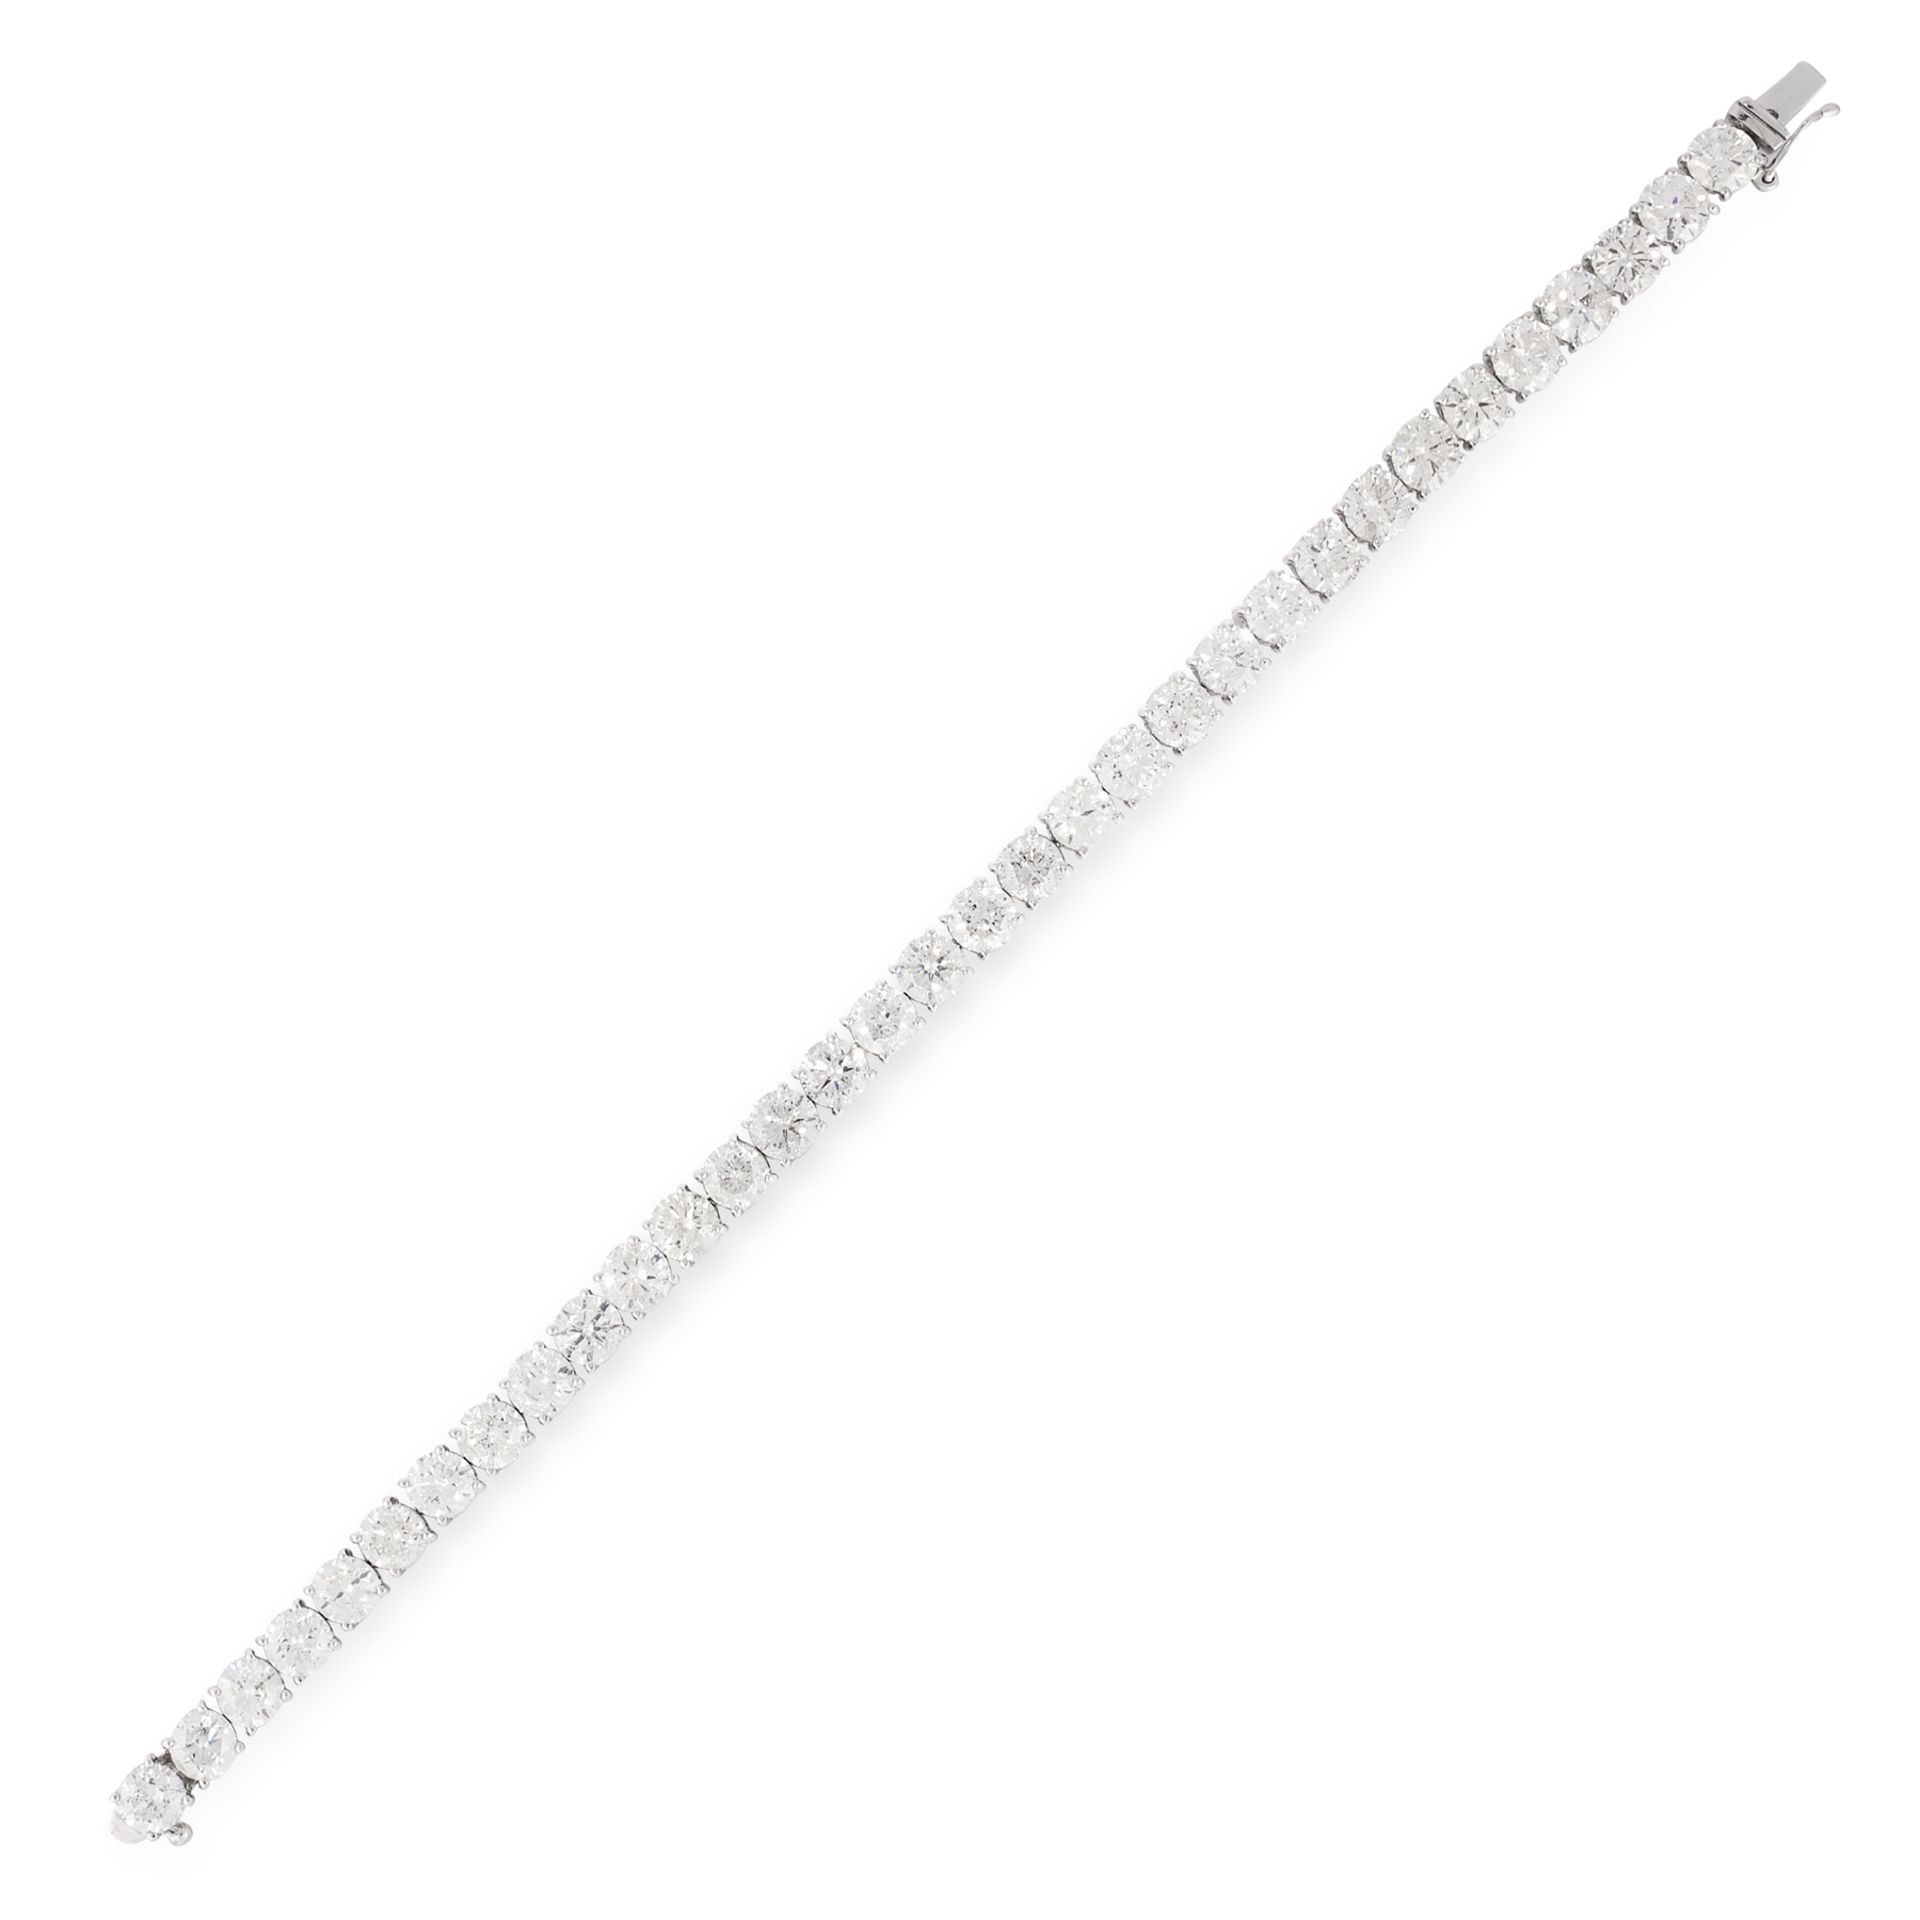 A 16.28 CARAT DIAMOND LINE BRACELET in 18ct white gold, set with a single row of thirty three